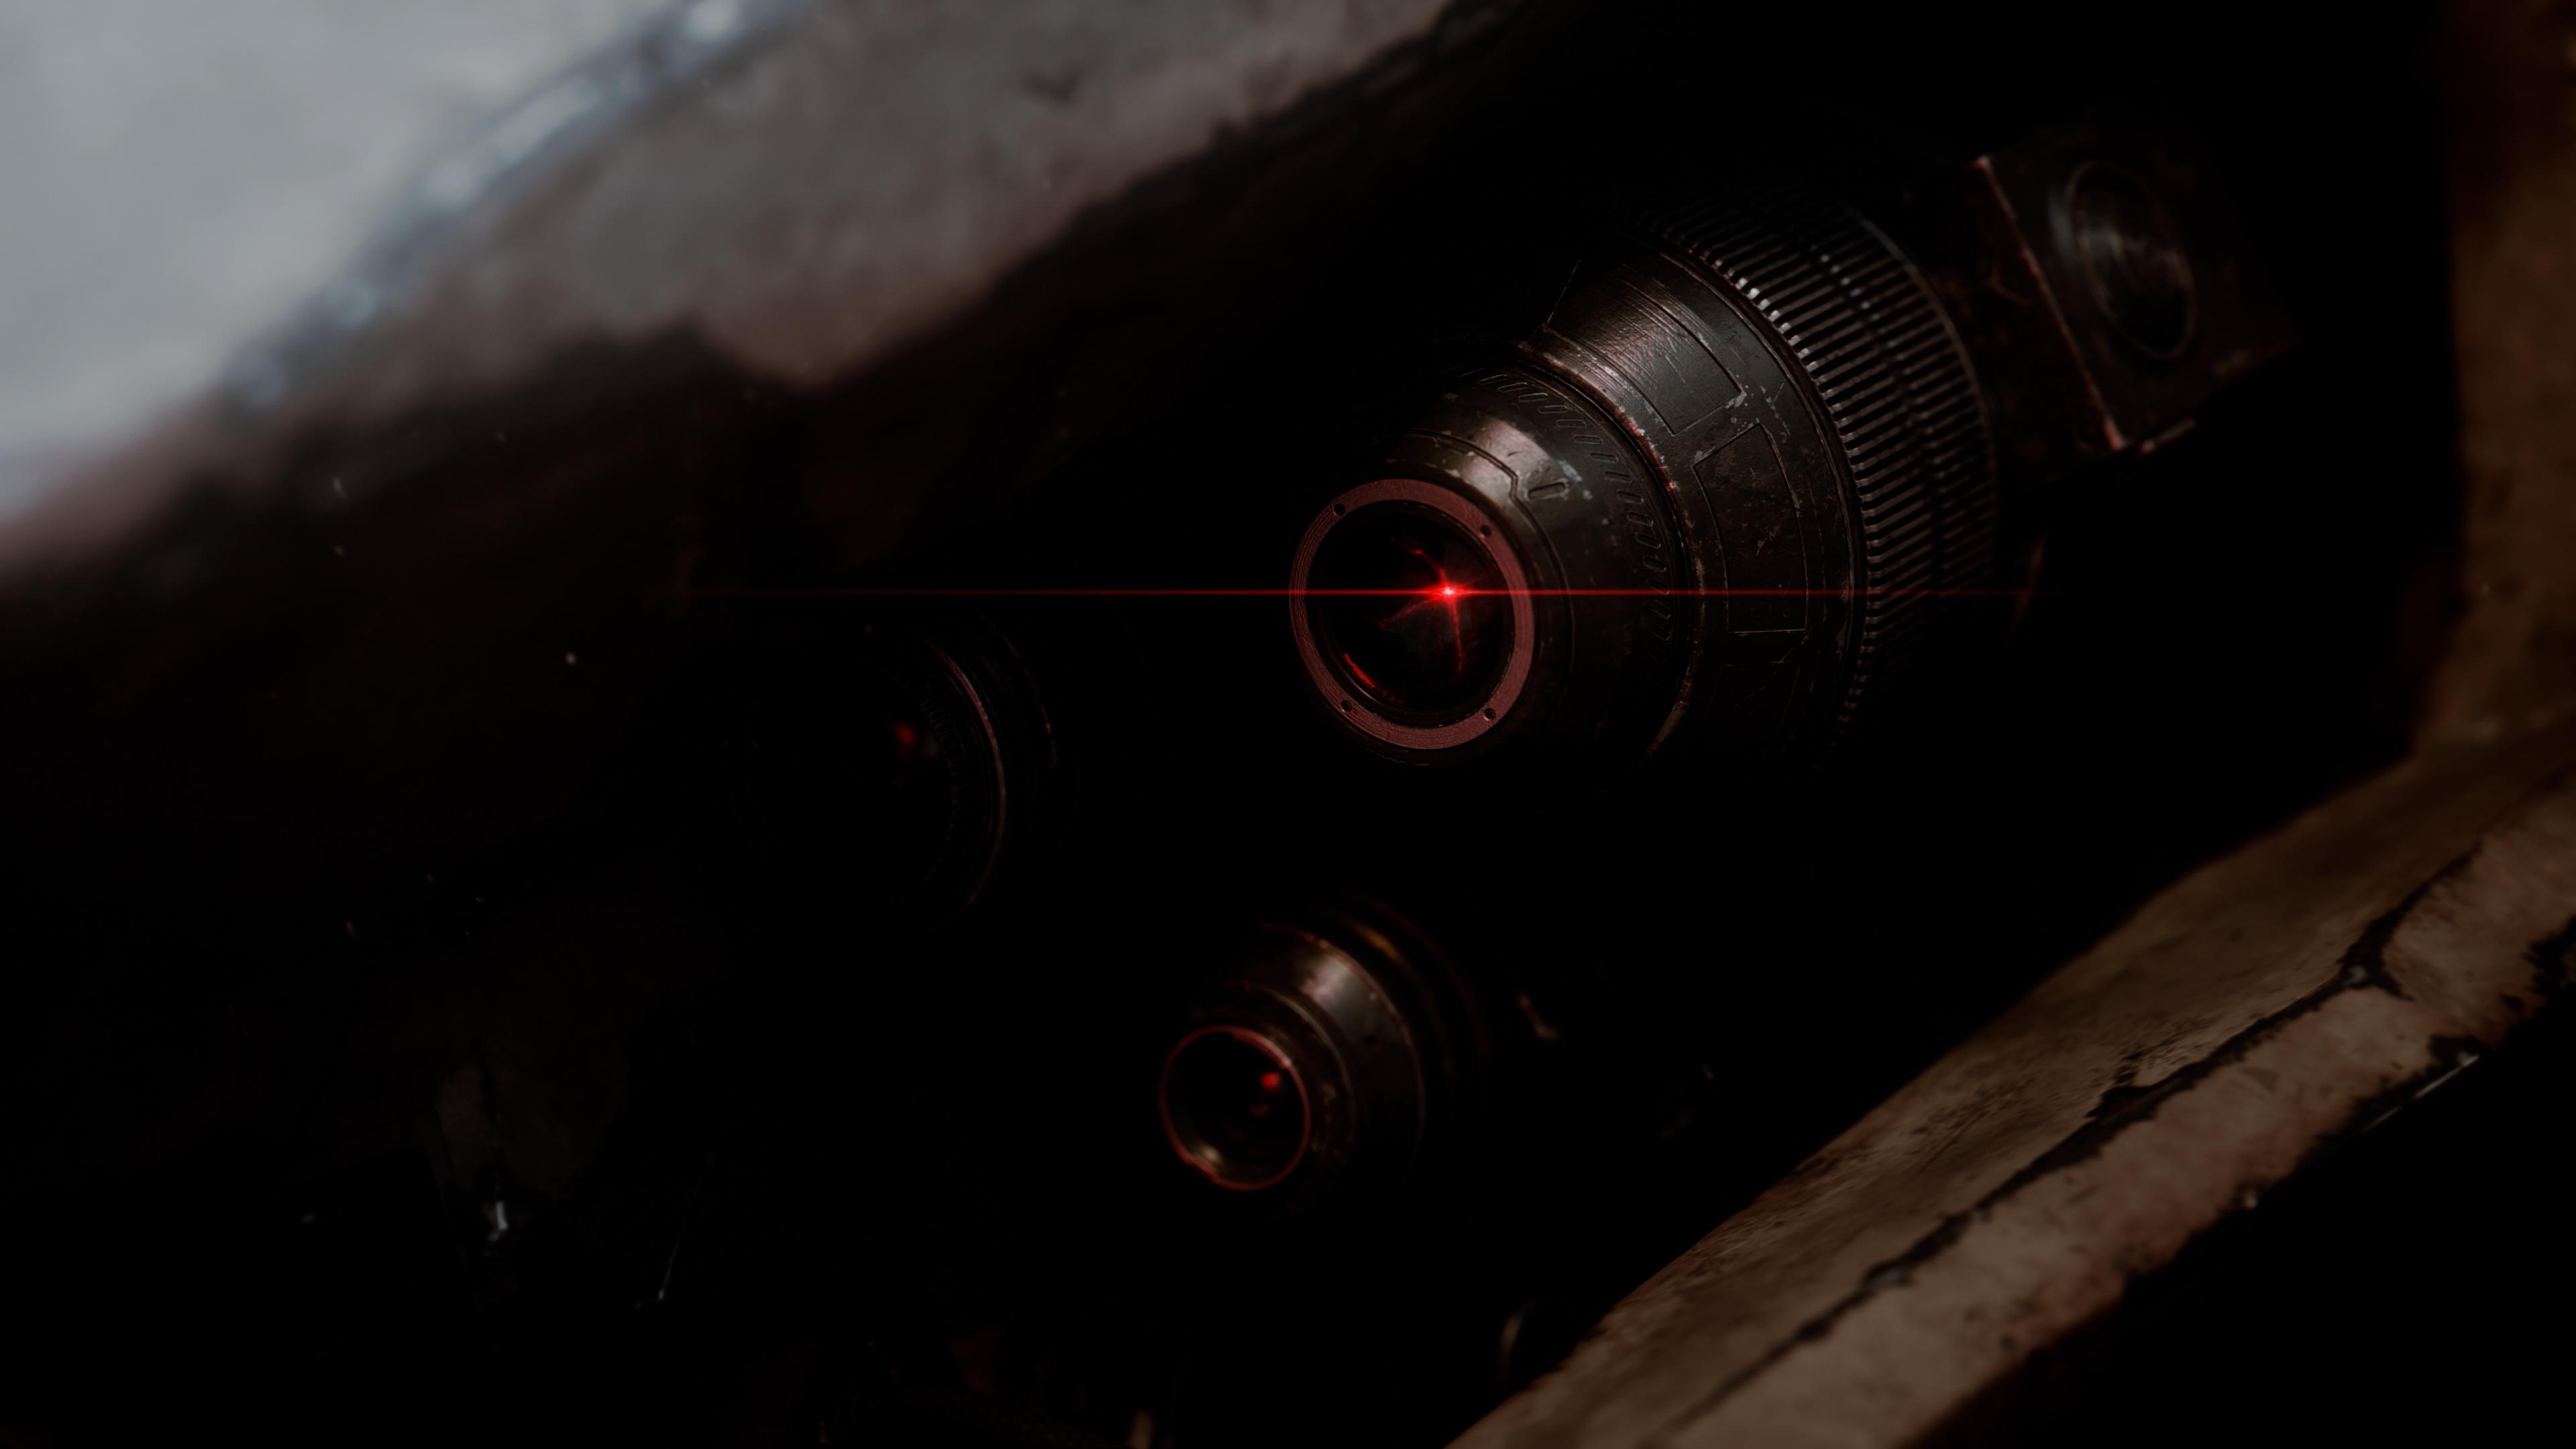 HD wallpaper featuring a close-up detail from Armored Core VI: Fires of Rubicon, perfect for desktop background.